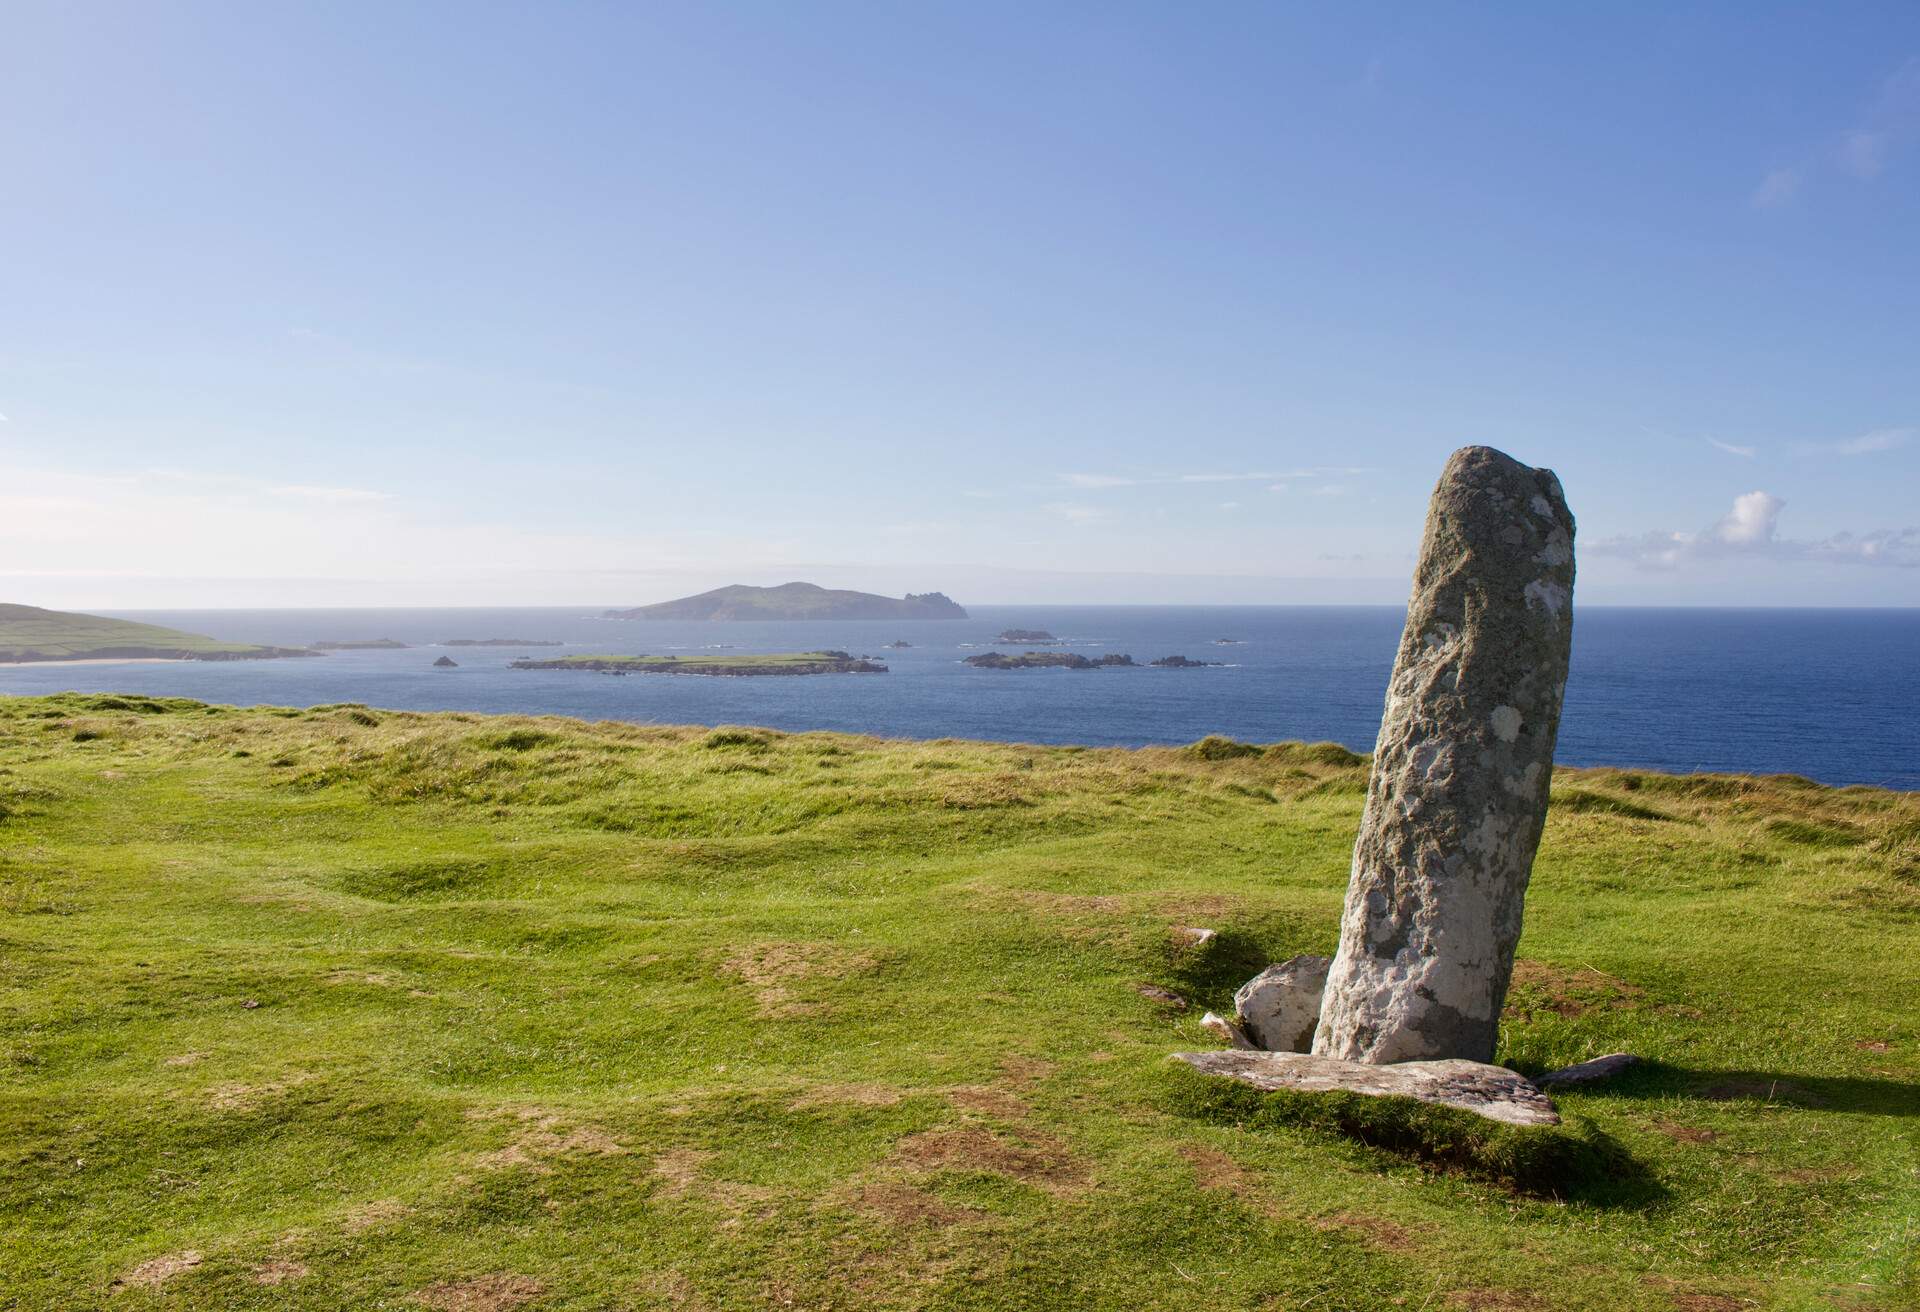 This image features an ancient ogham stone obelisk atop Dunmore Head on the Dingle Peninsula in County Kerry, Ireland.